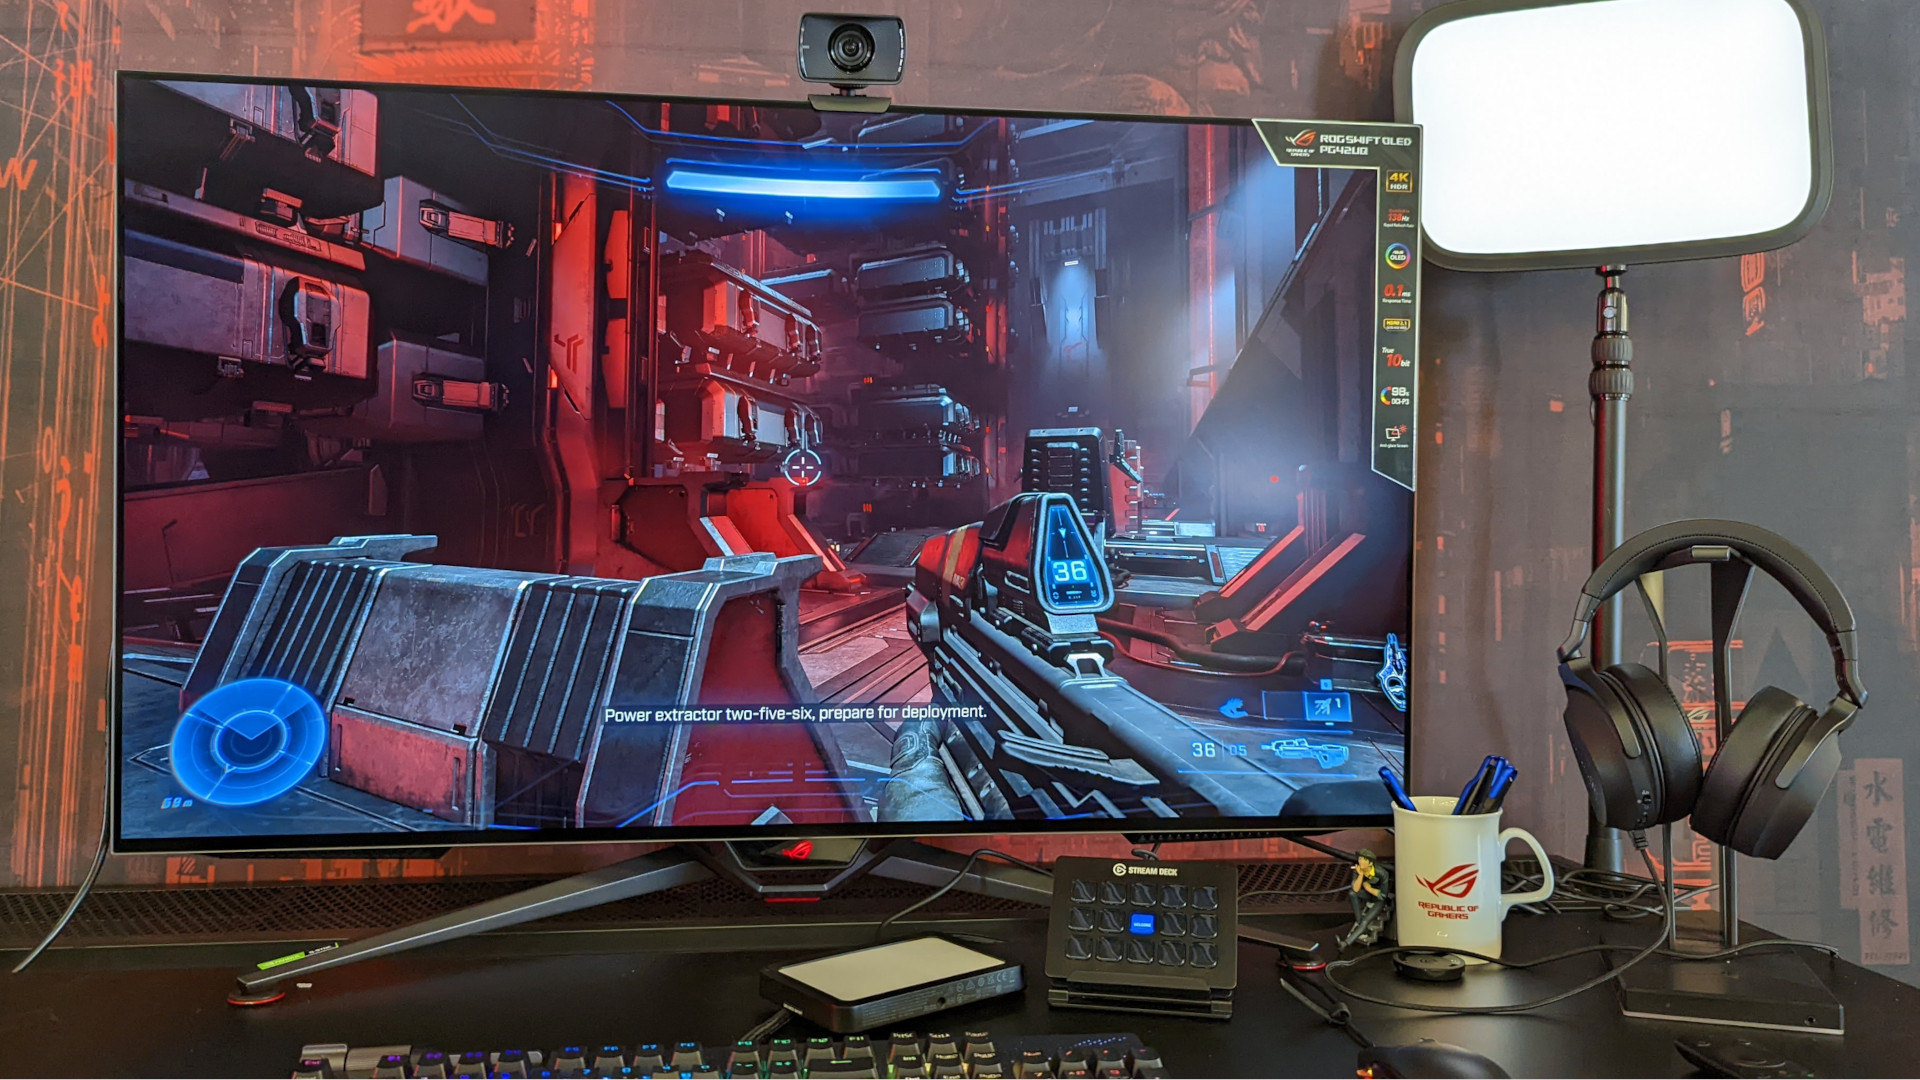 The Asus ROG Swift OLED PG42UQ gaming monitor, sat on a desk surrounded by various other periperhals